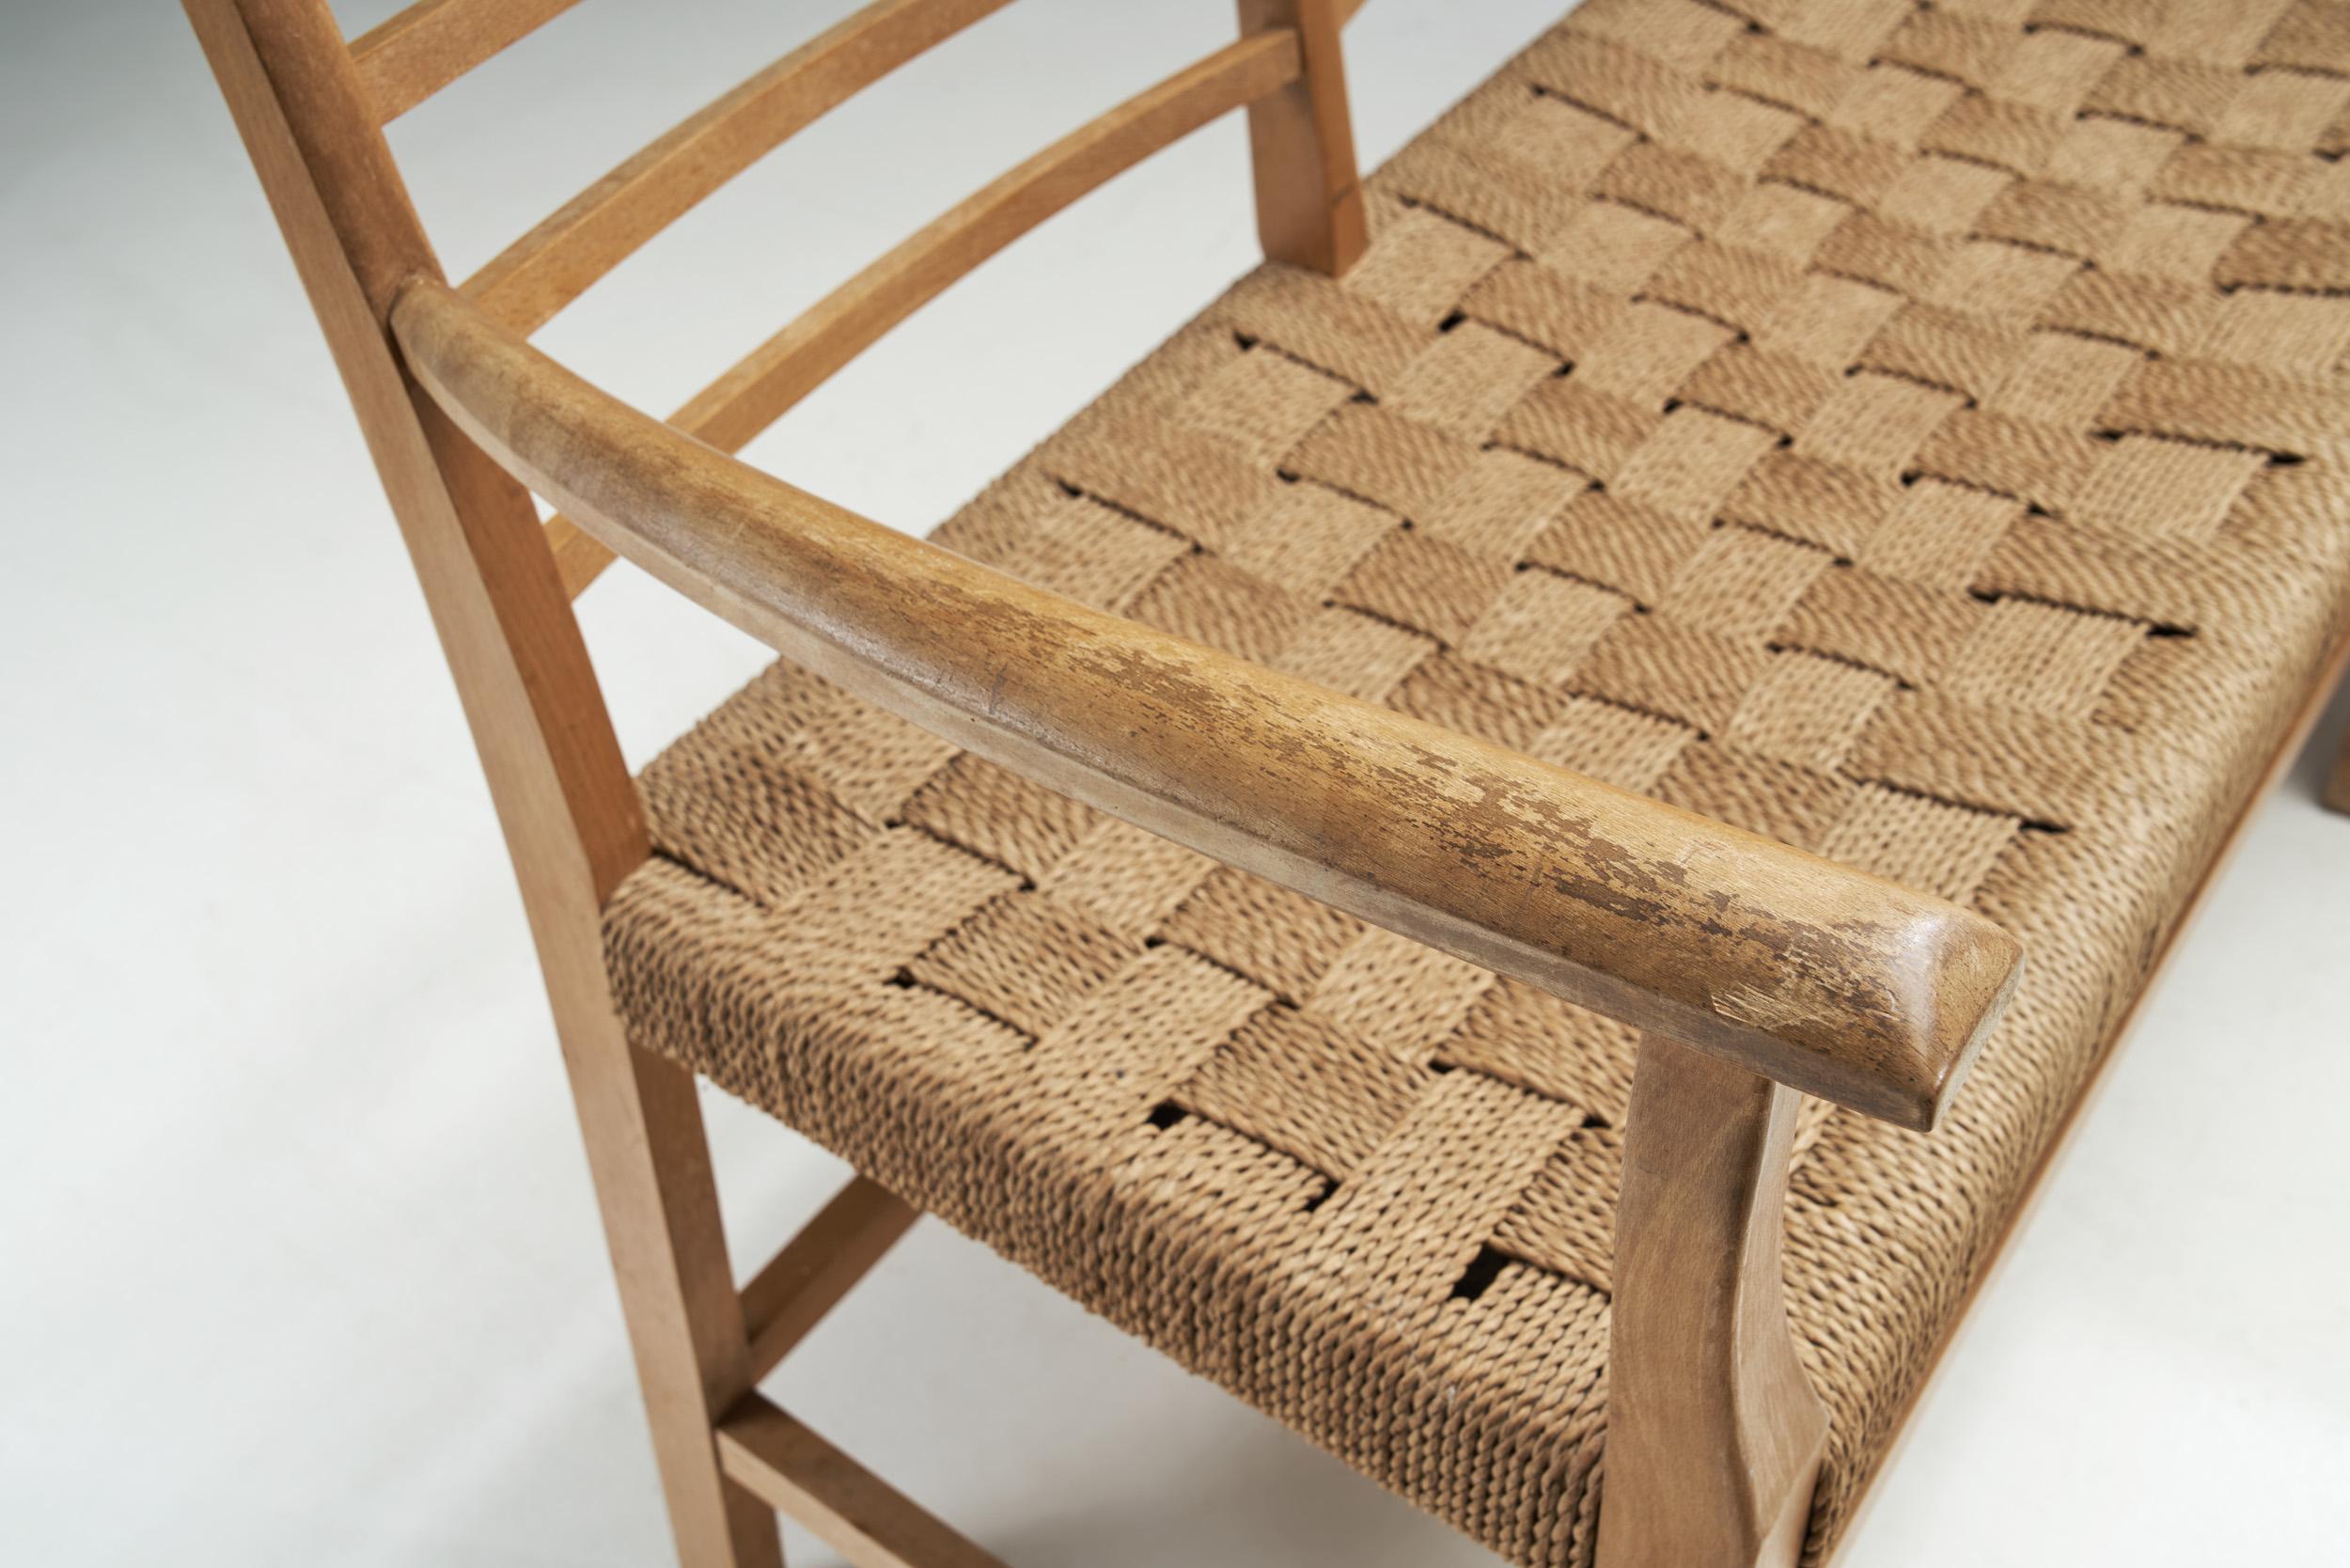 Mid-20th Century Danish Beech Wood Corner Bench with Woven Paper cord Seat, Denmark, 1940s